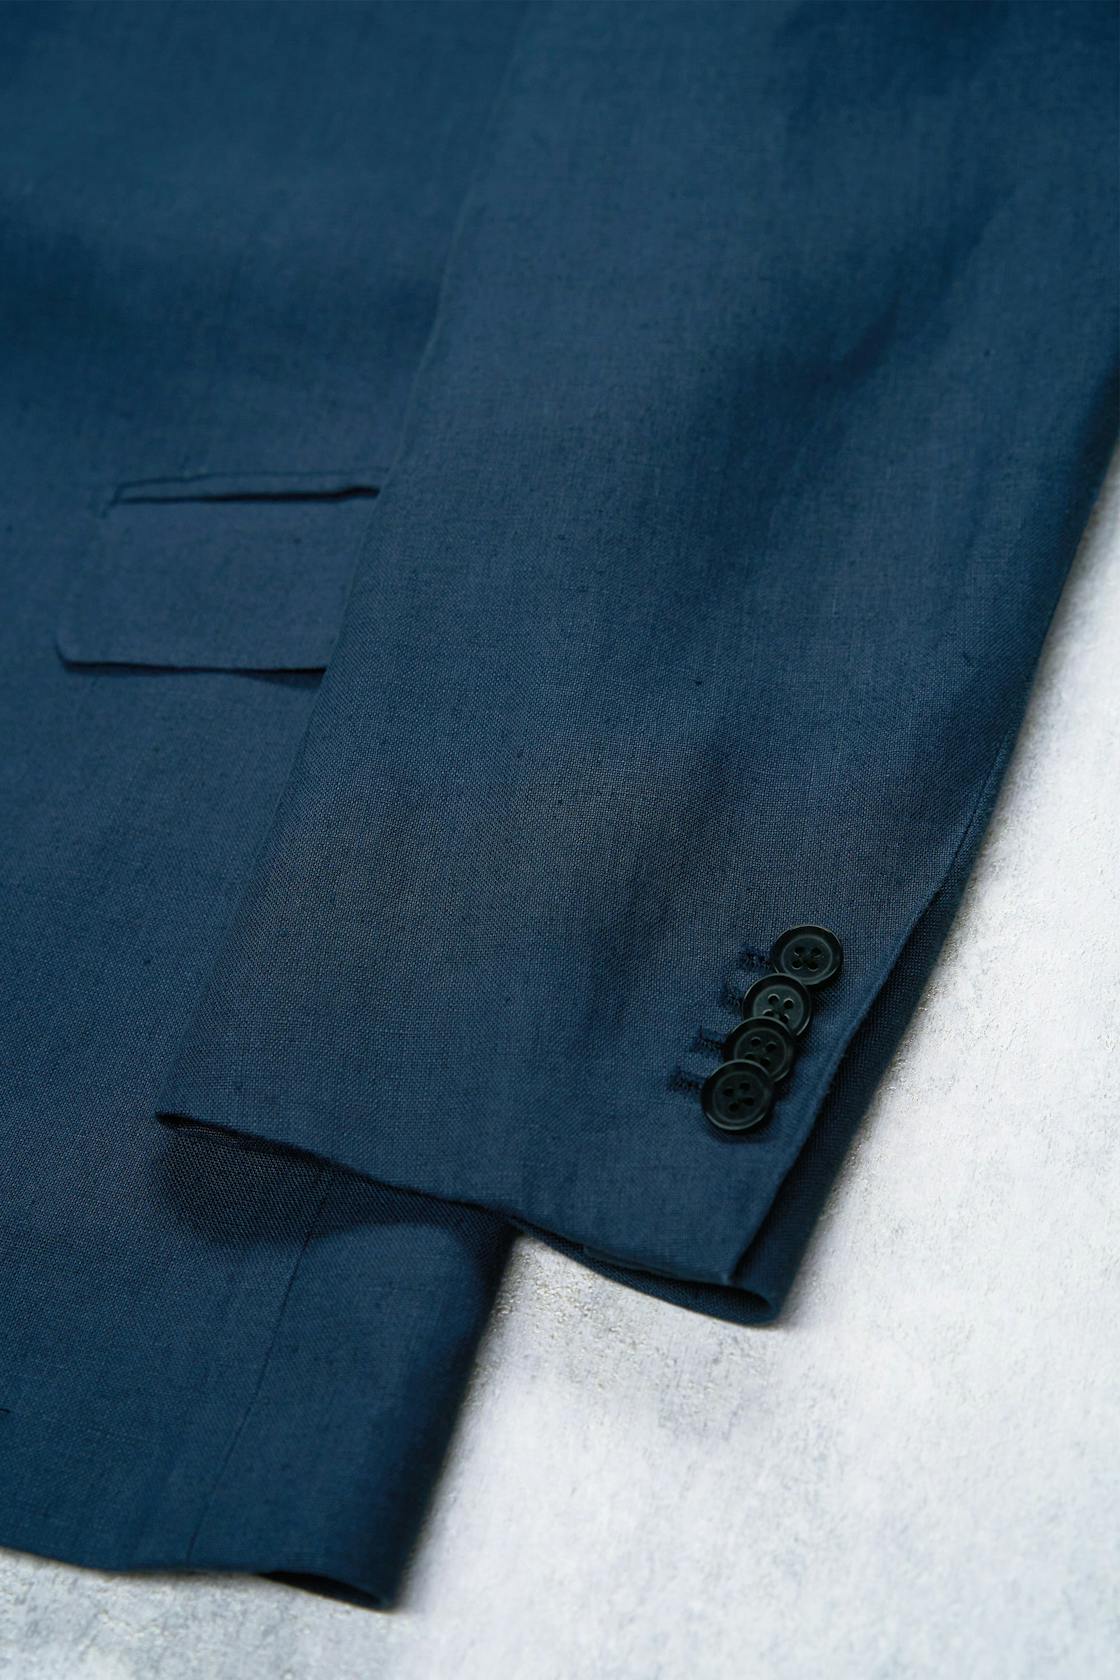 The Armoury by Ring Jacket Model 3 Blue Linen Suit